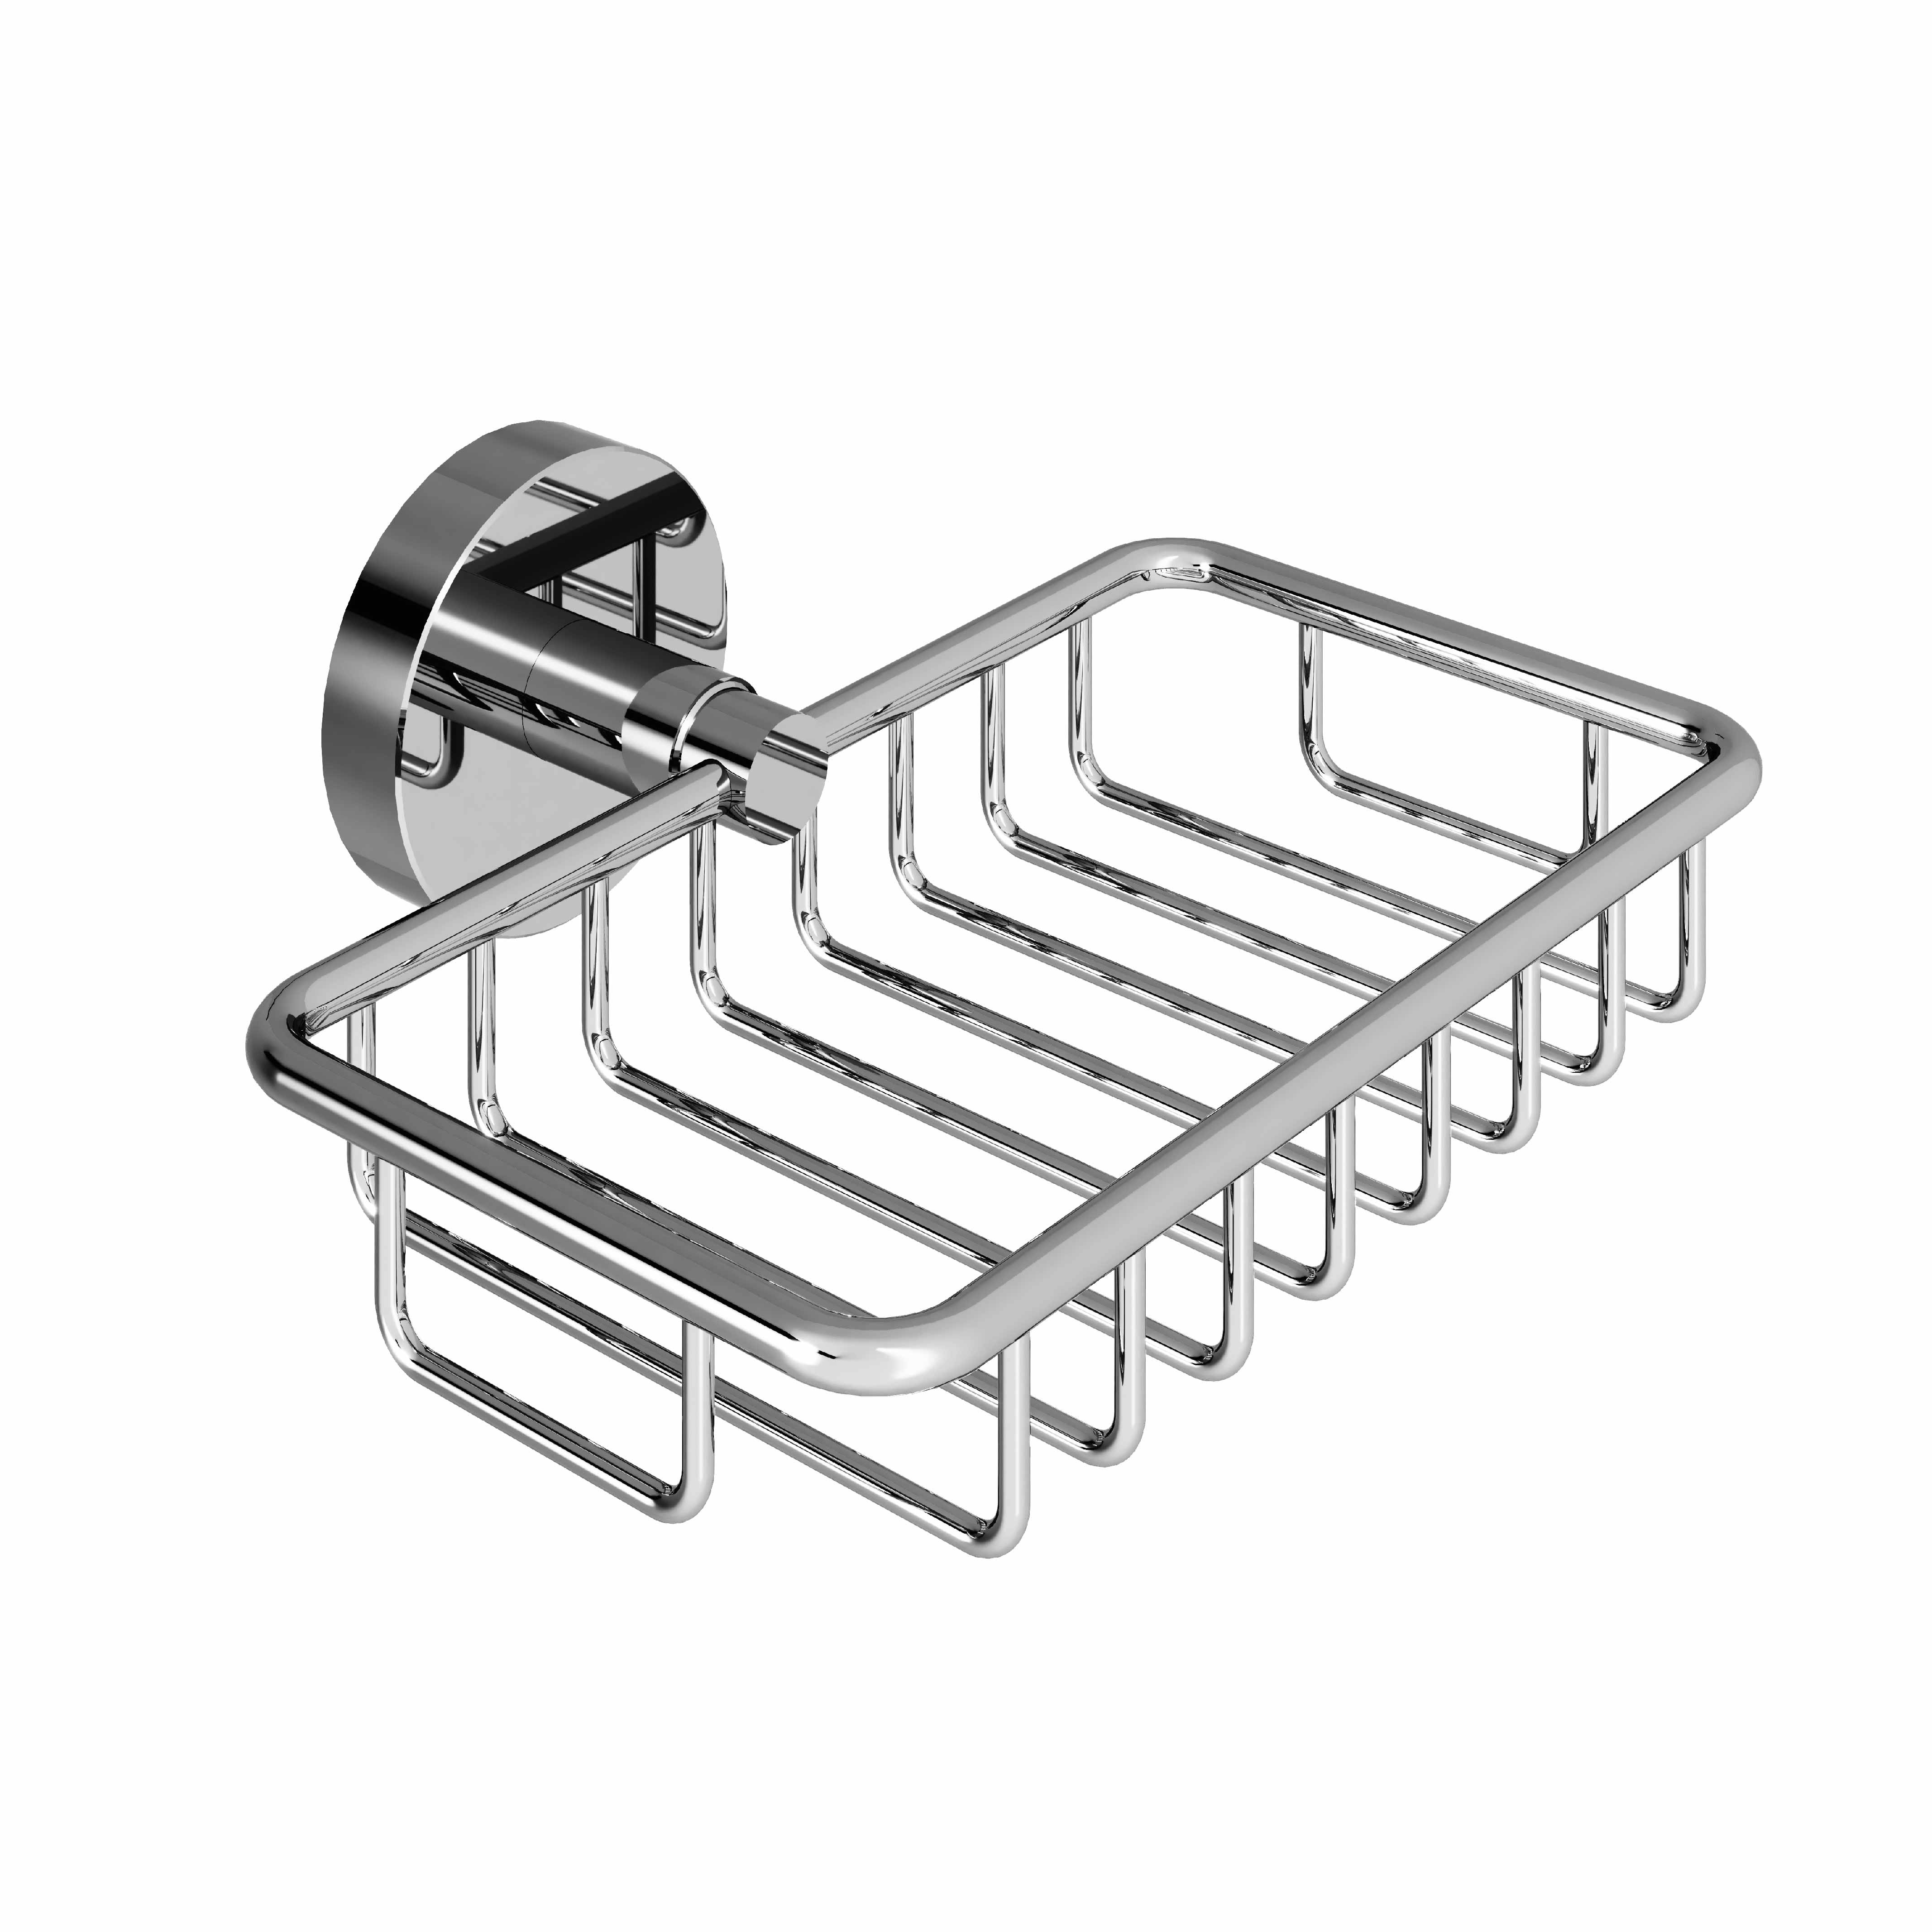 M91-519 Wall mounted shower soap holder